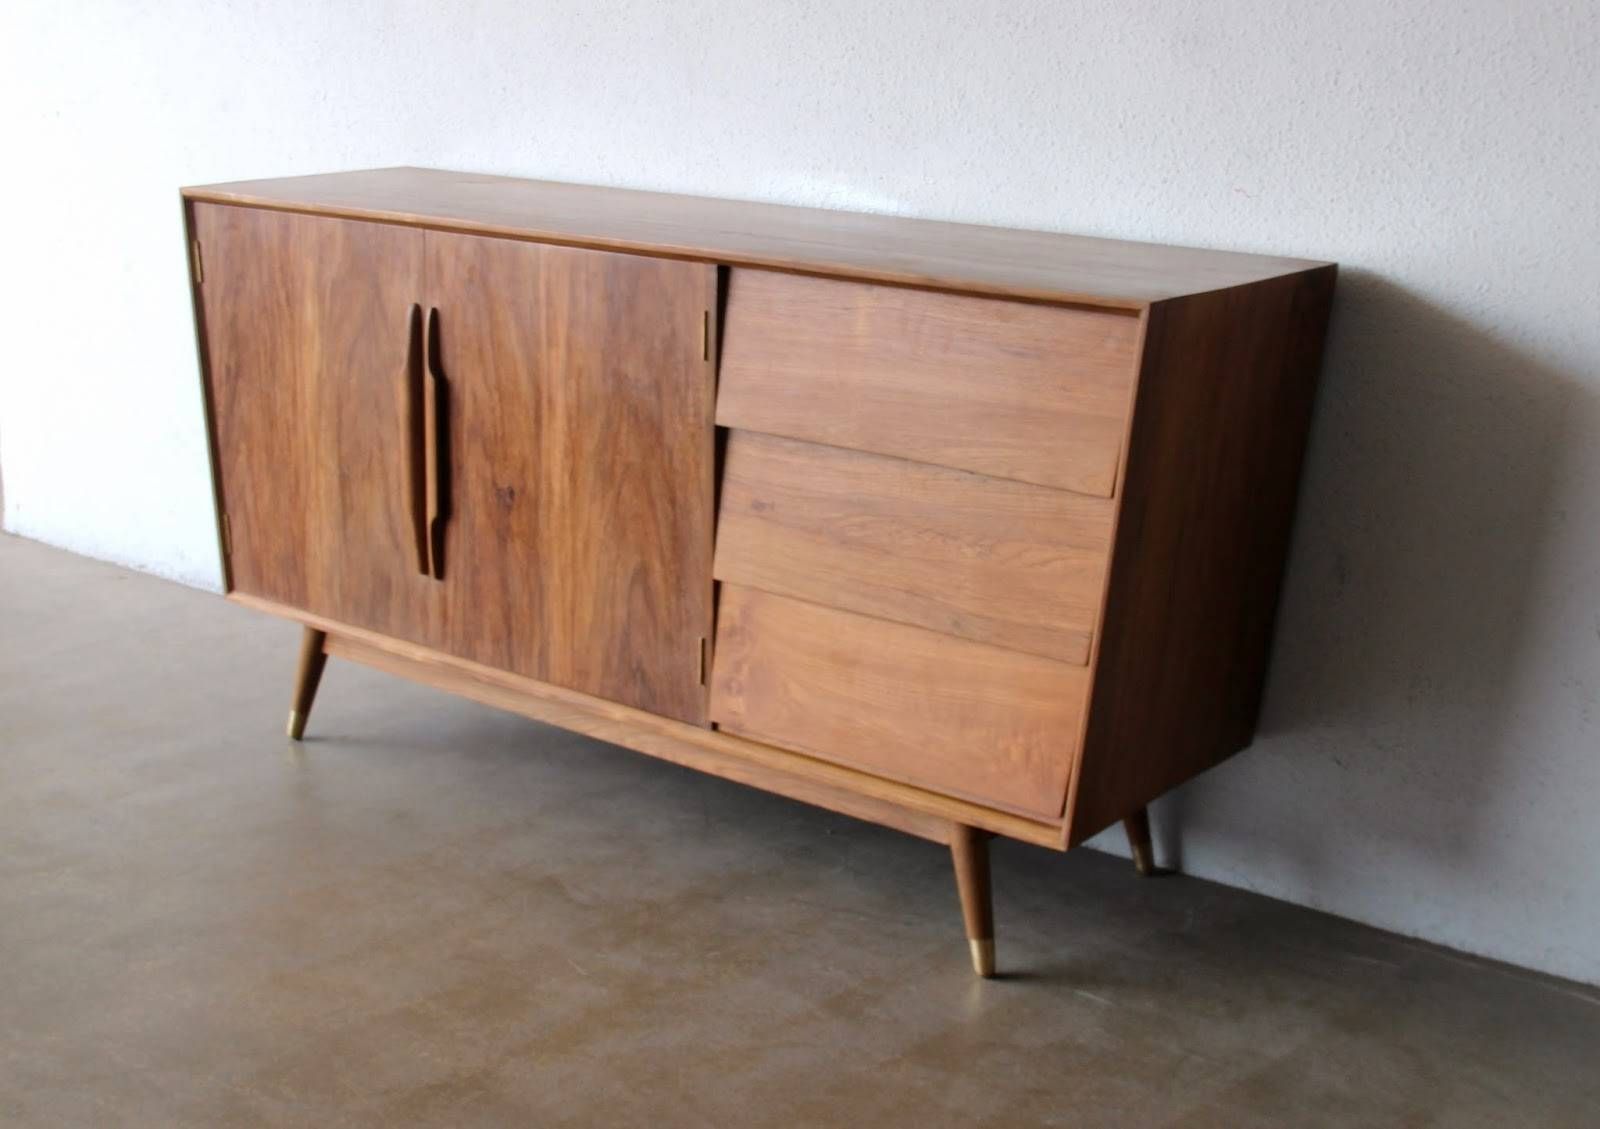 Second Charm Furniture – Mid Century Modern Influence | Second Charm Regarding Mid Century Sideboards (View 4 of 15)